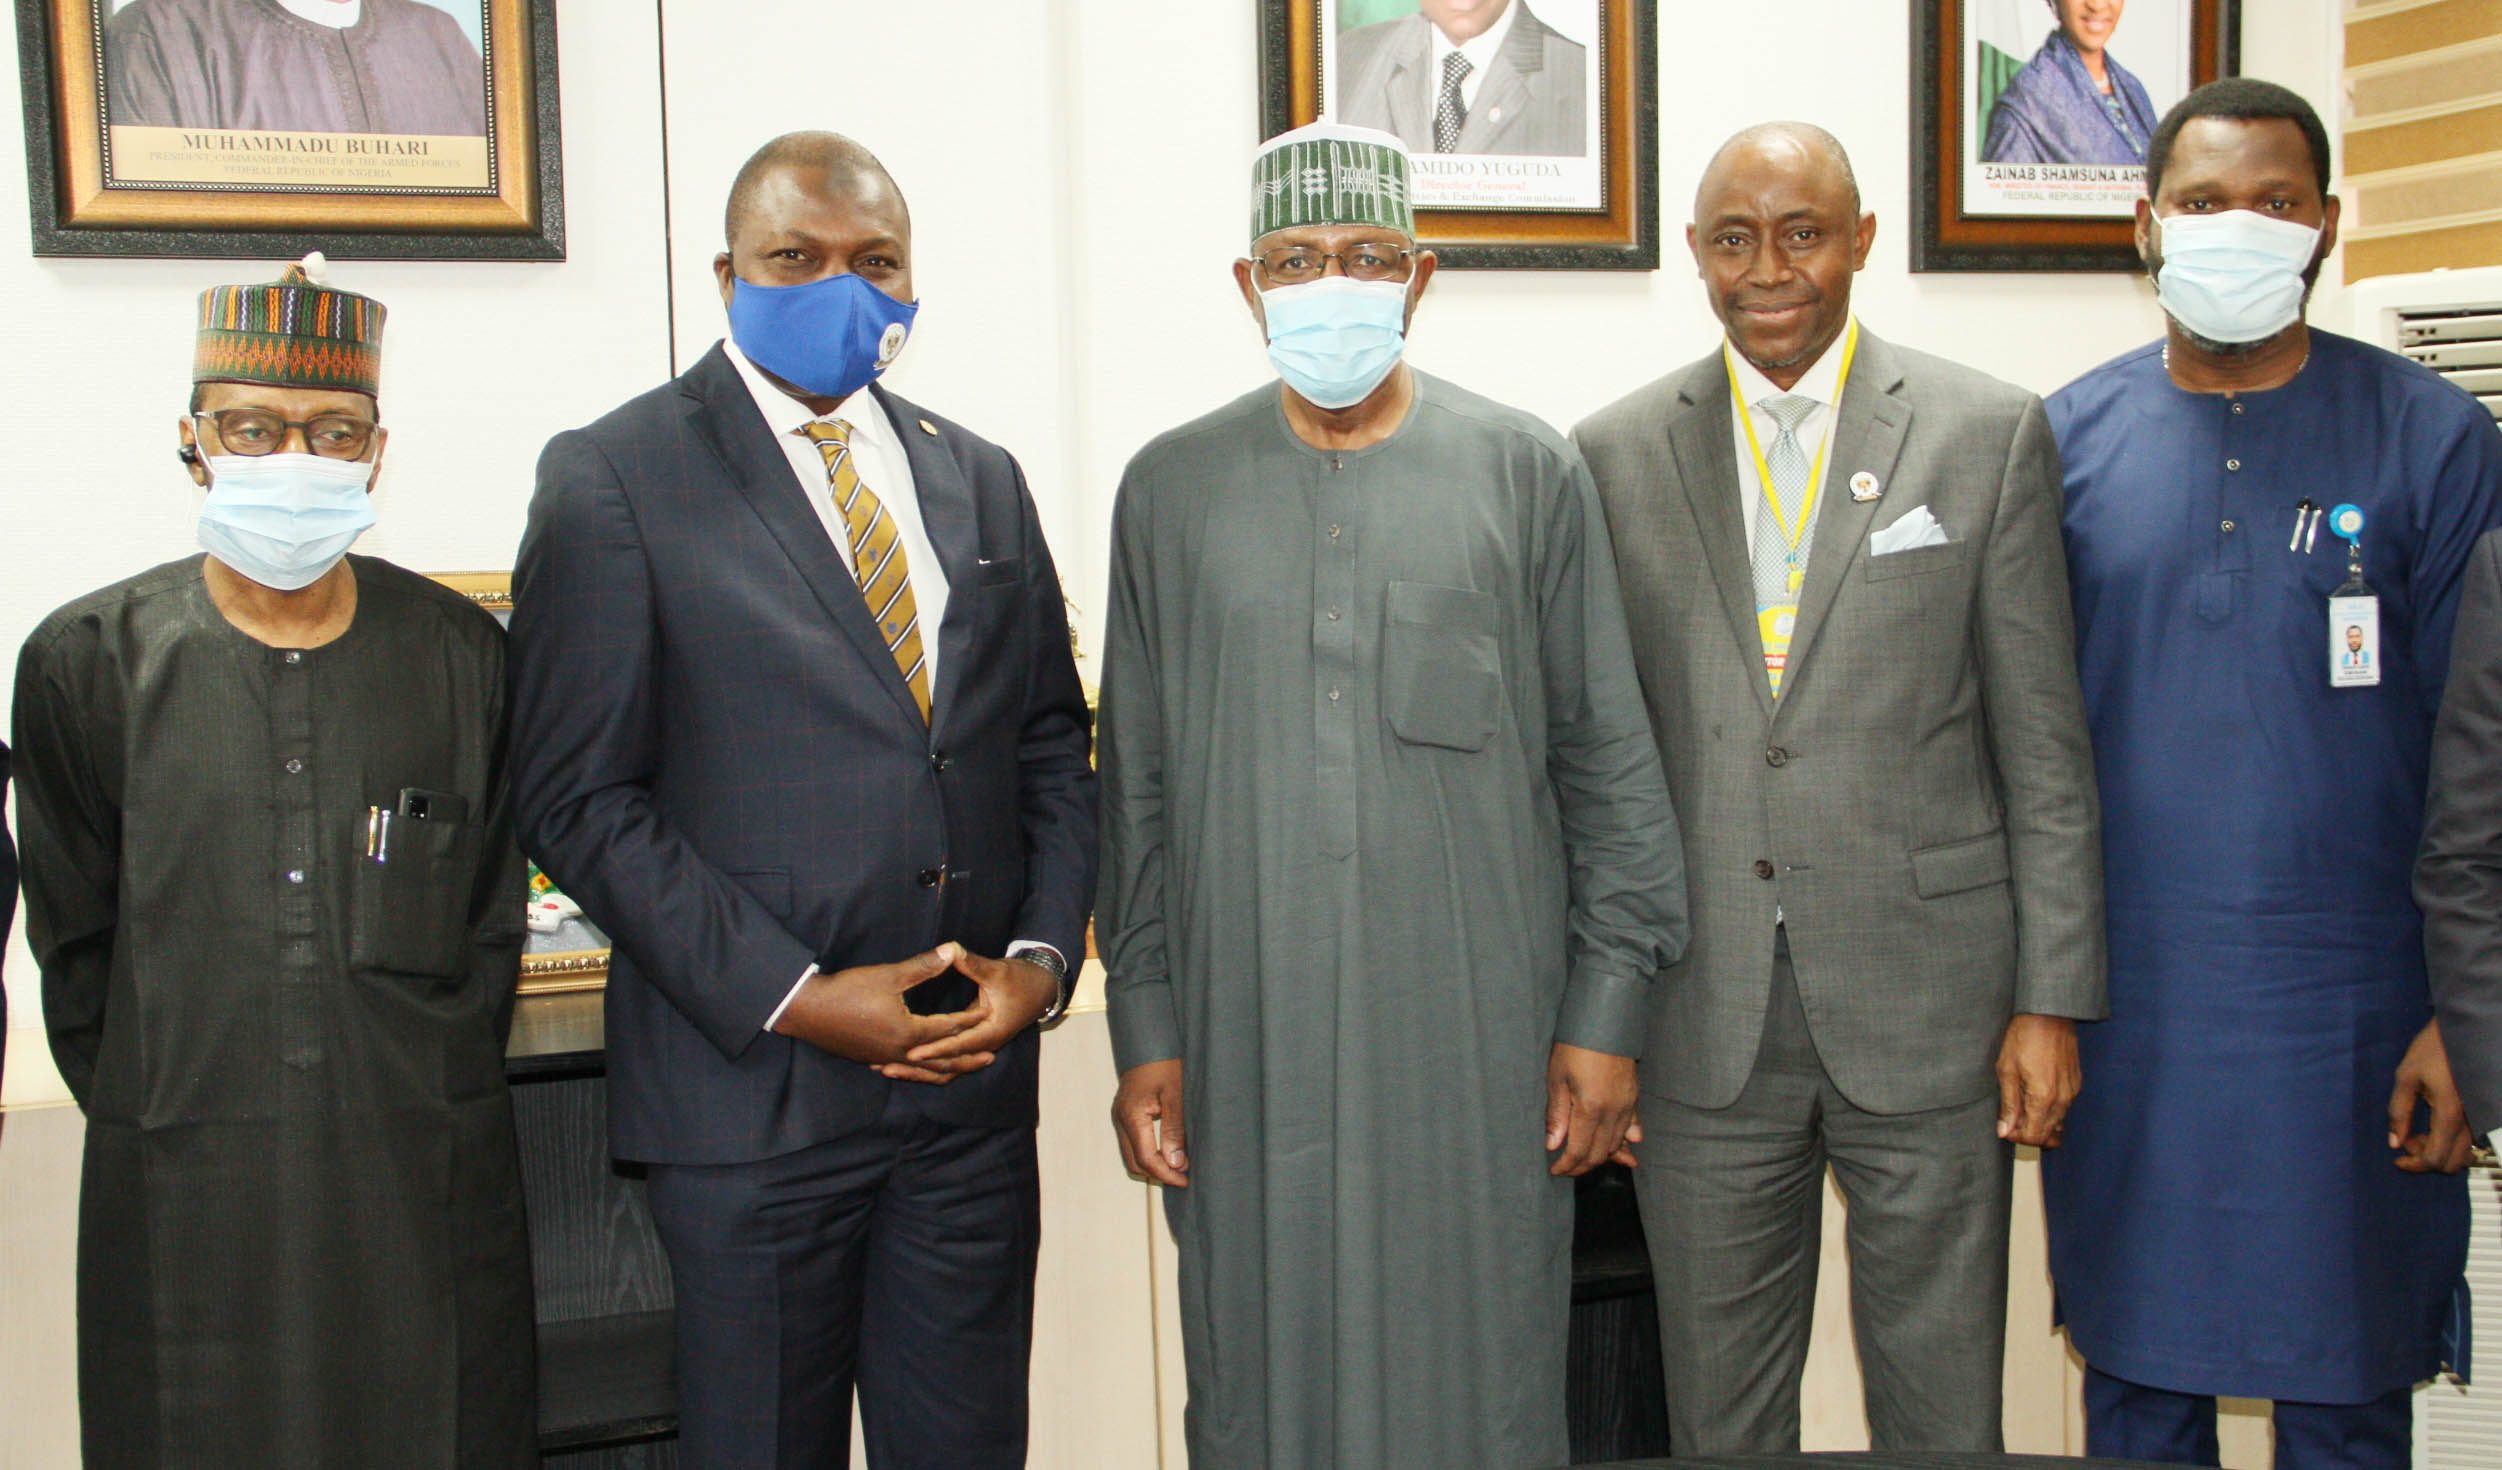 L-R, President, Chartered Institute of Stockbrokers Mr Tunde Amolegbe, Director General Securities and Exchange Commission Mr Lamido Yuguda and Past President CIS Mr Ariyo Olushekun during a Meeting between The SEC and CIS in Abuja 